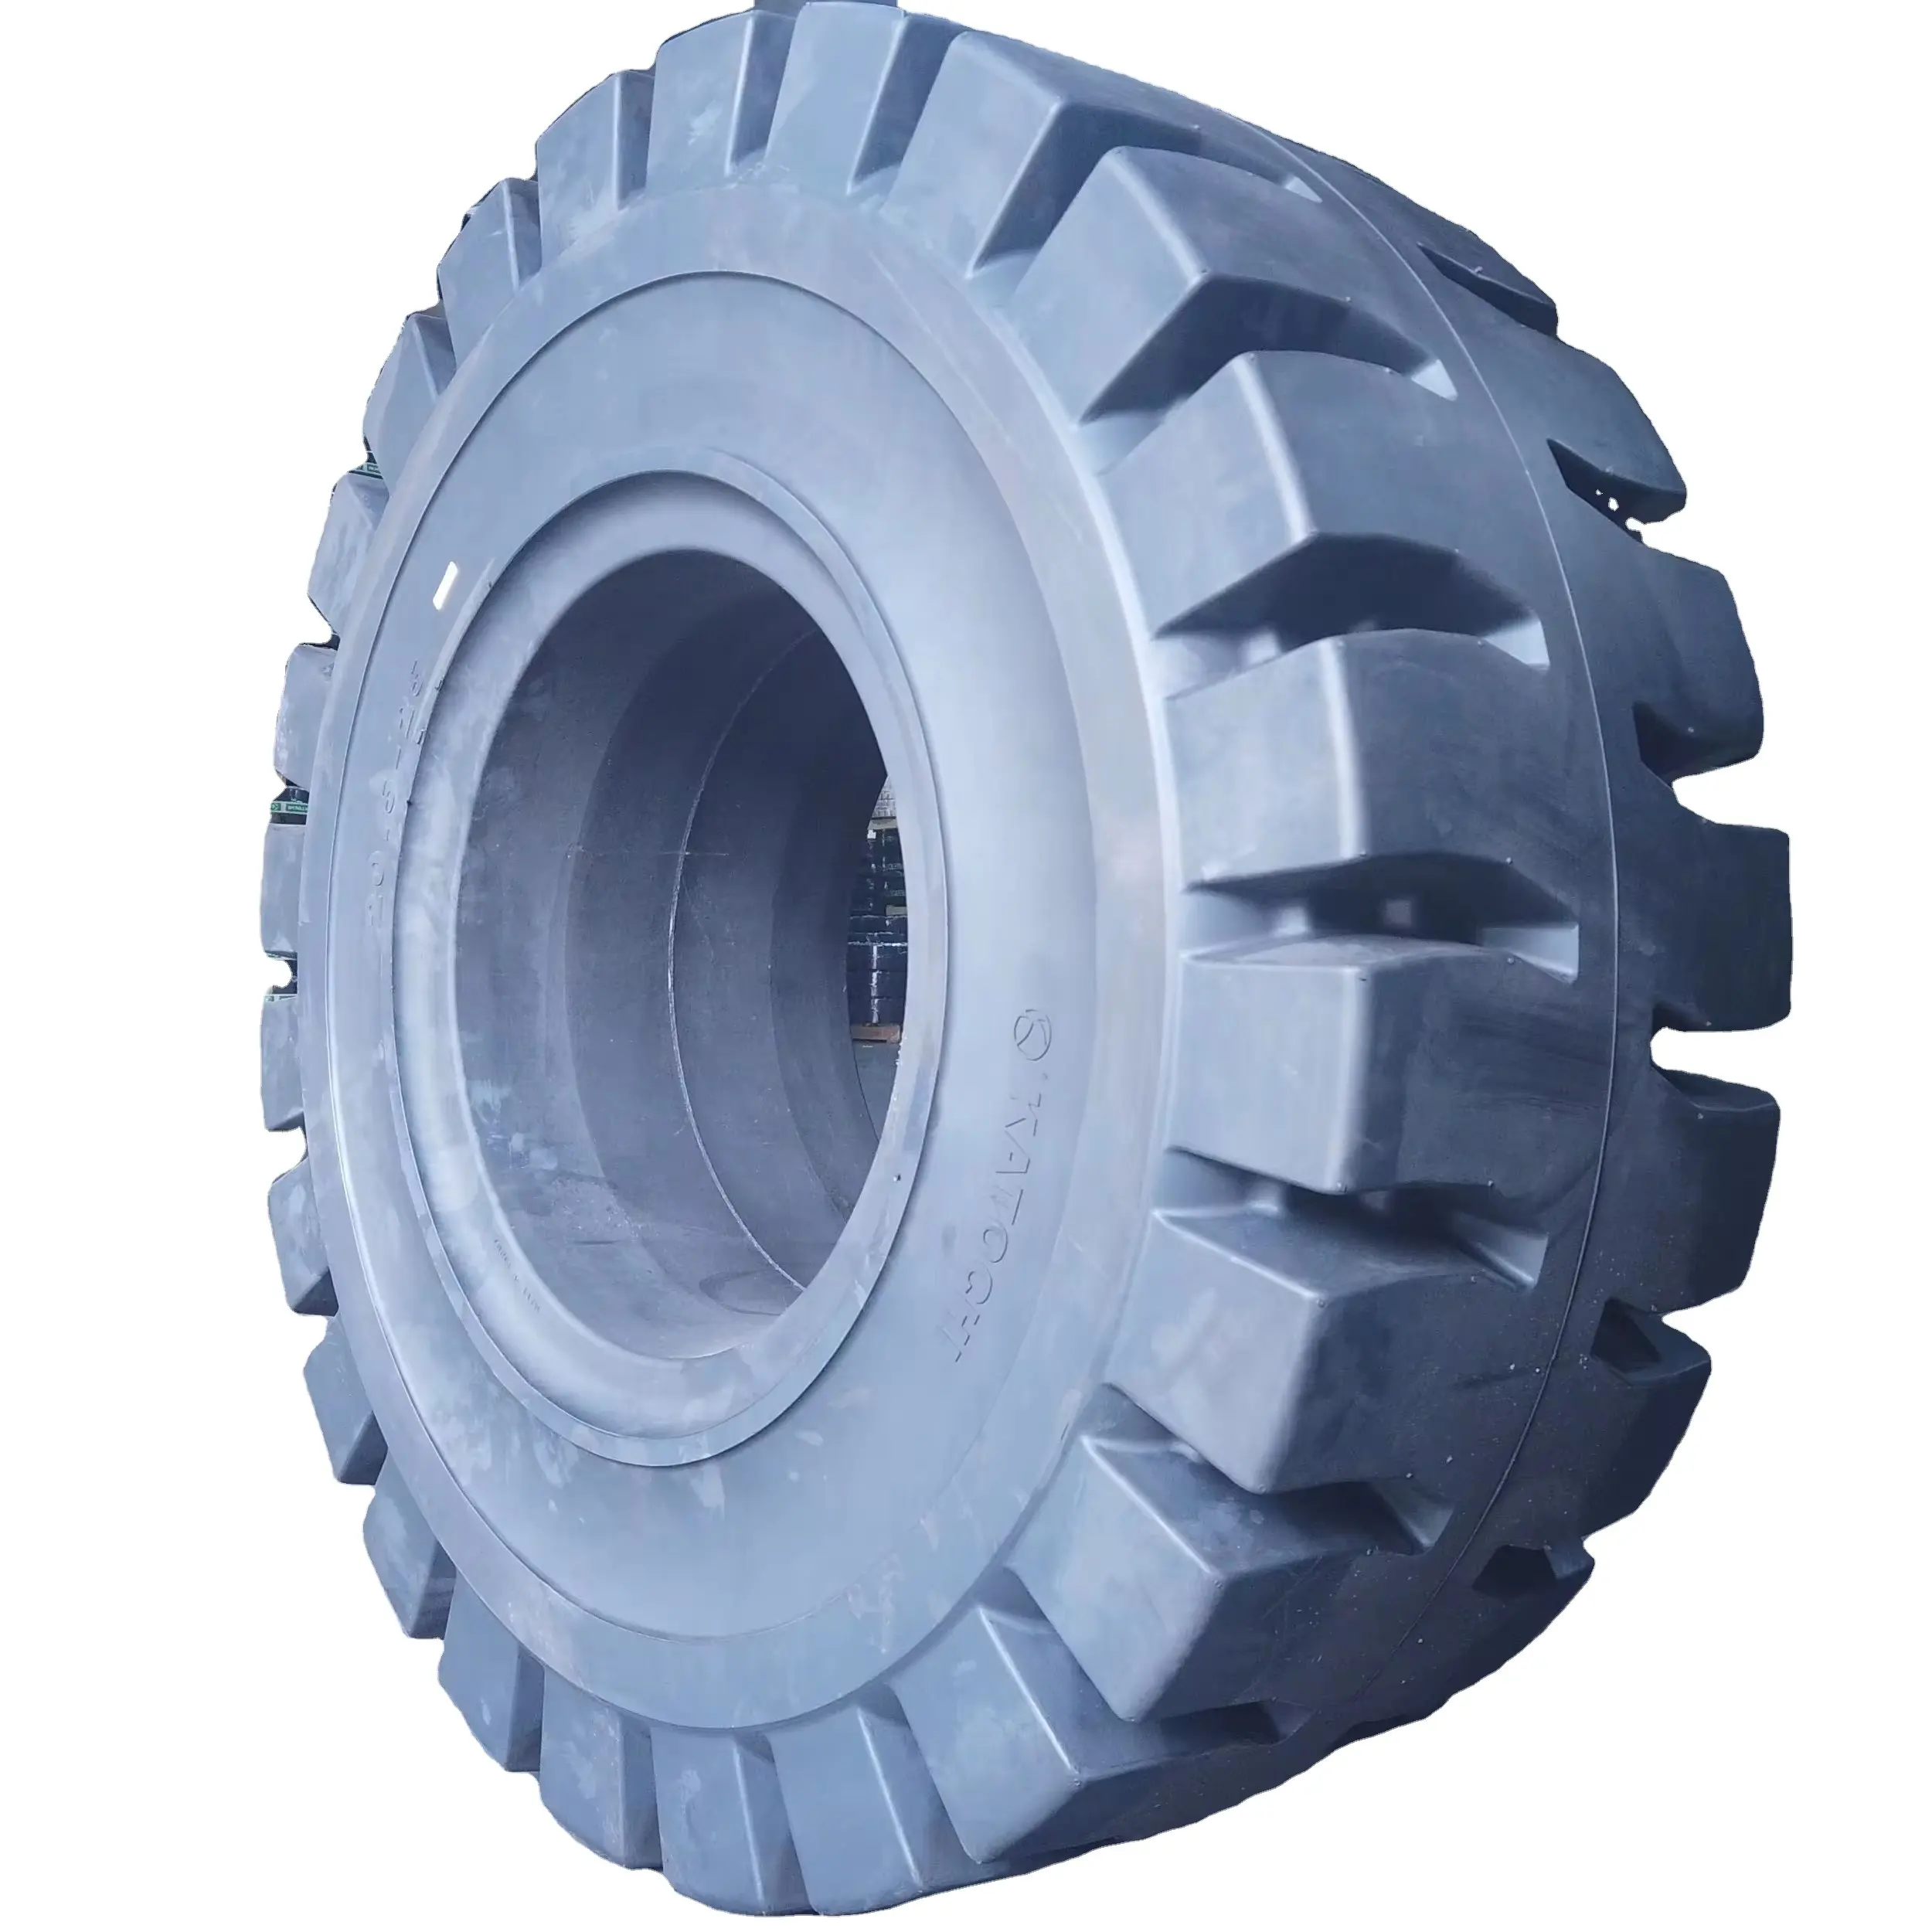 18.00-25/13.0 21.00-25/15.0 solid otr tire for gantry crane and wheel loaders